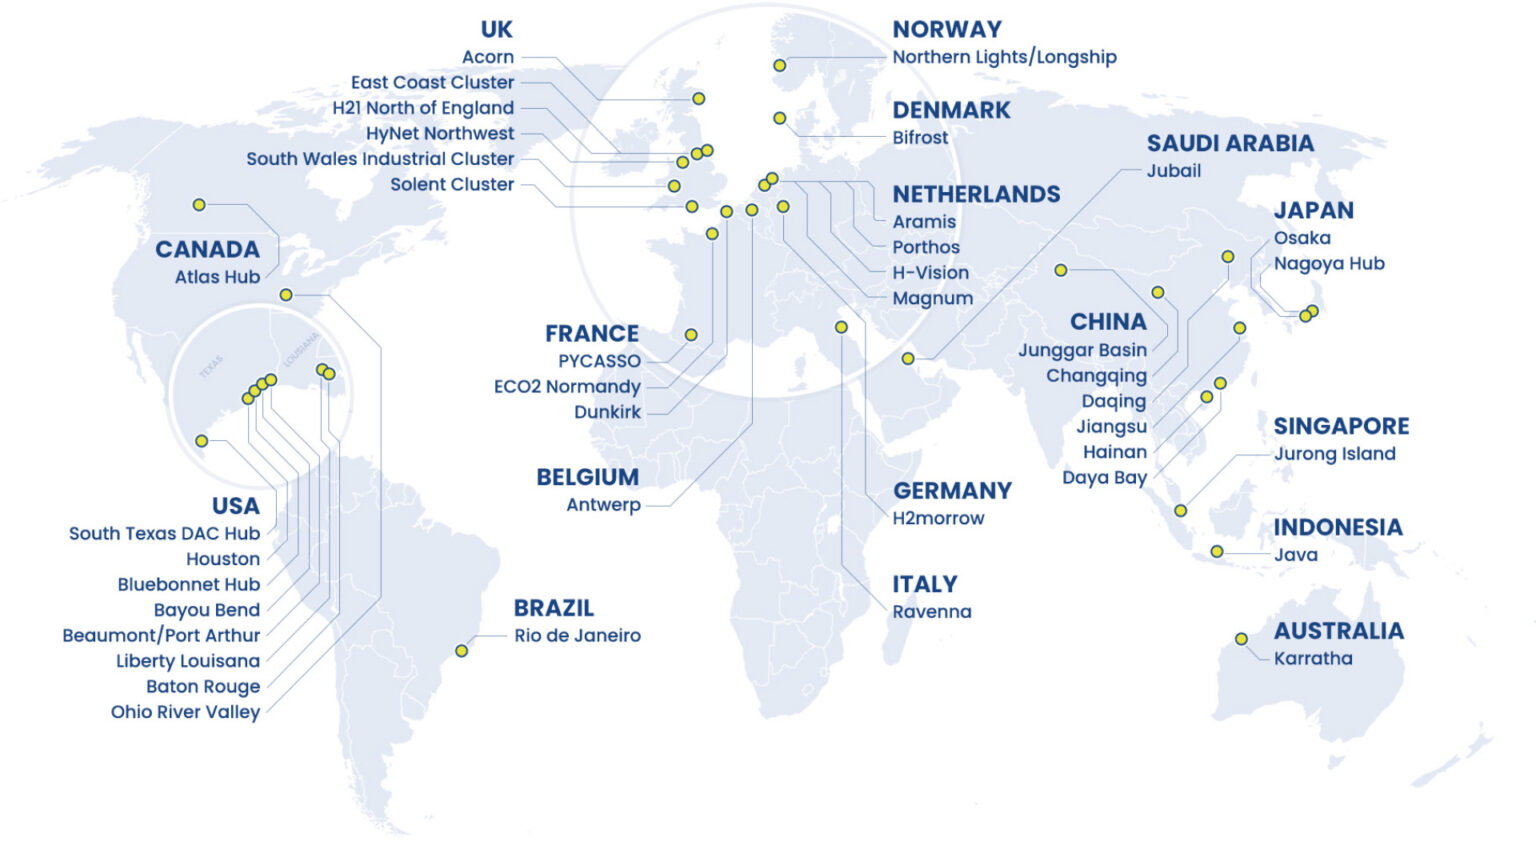 A map of the world showing CCUS hubs with OGCI member company participation.